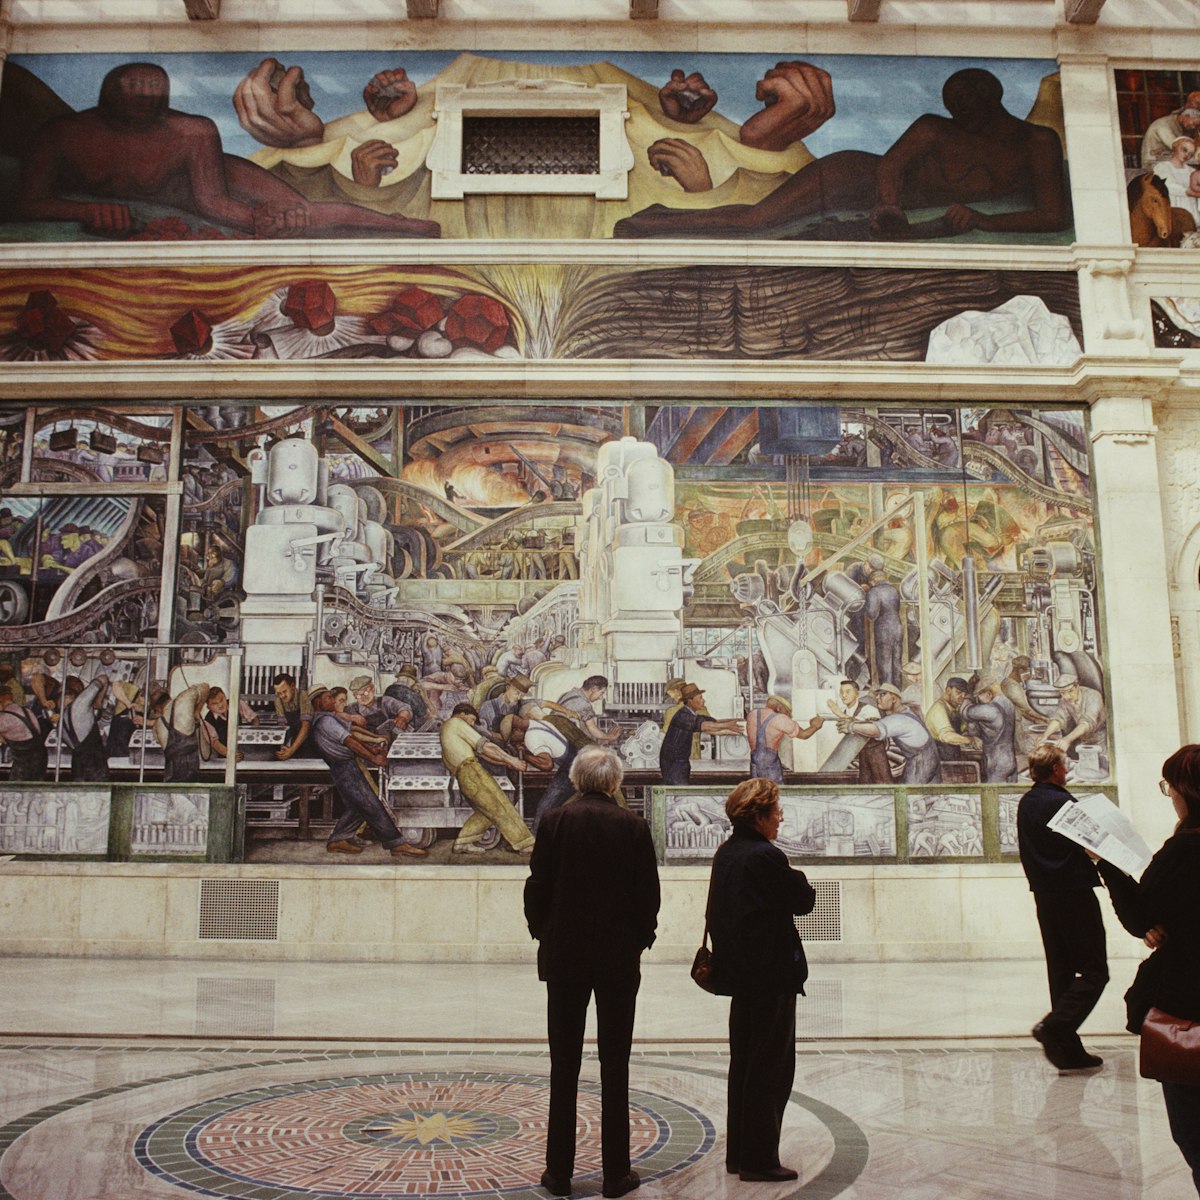 The North Wall of the Detroit Industry Murals, a series of frescoes by Mexican artist Diego Rivera at the Detroit Institute of Arts, Detroit, Michigan, October 1988. (Photo by Barbara Alper/Getty Images)